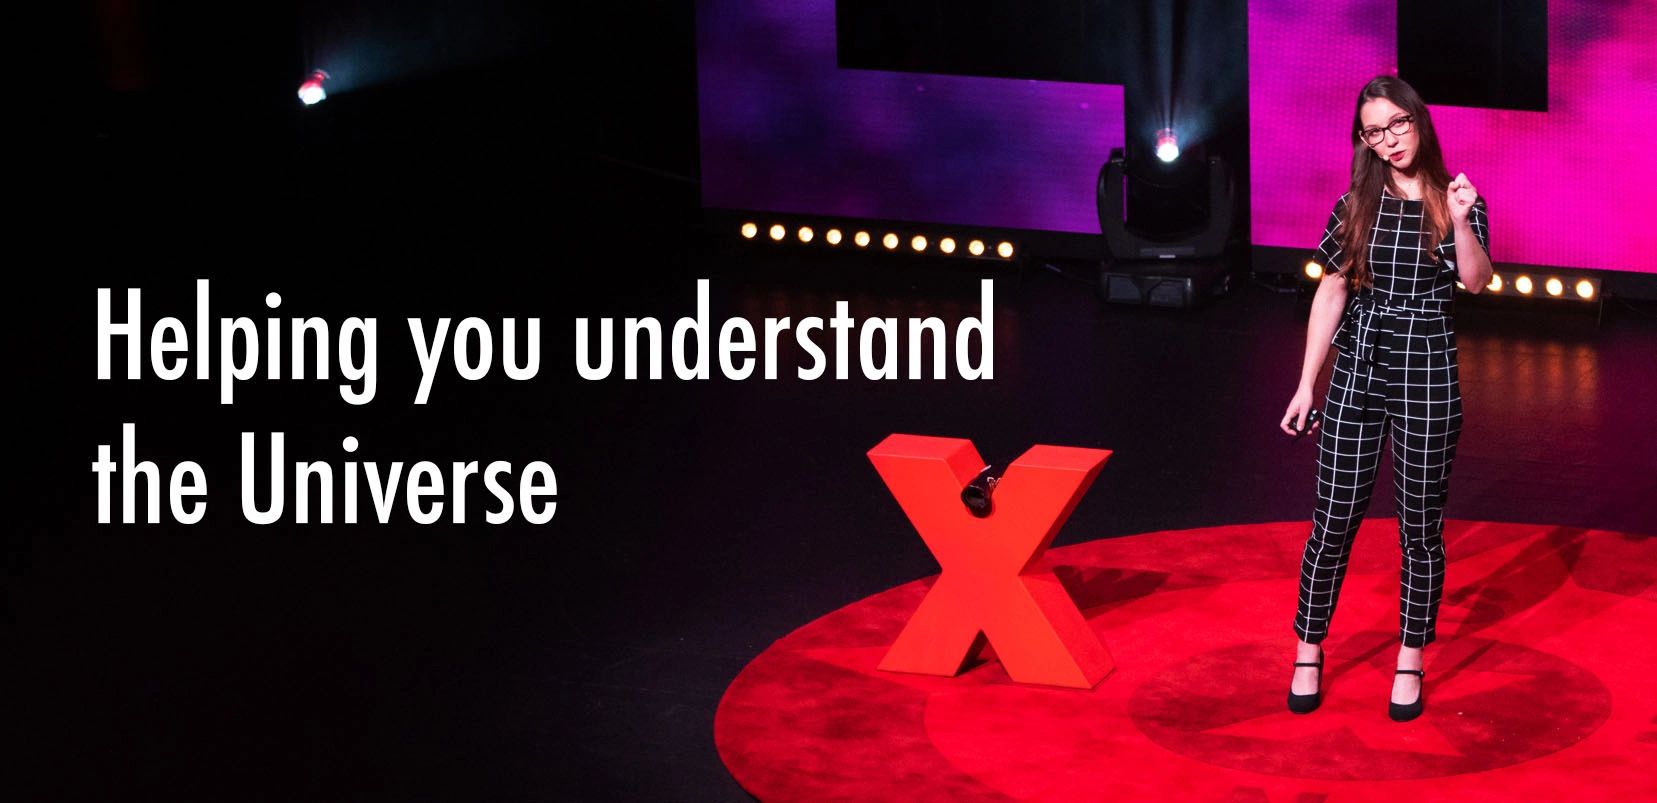 Main text: Helping you understand the Universe. Image: Kirsten presenting on the TEDx stage.